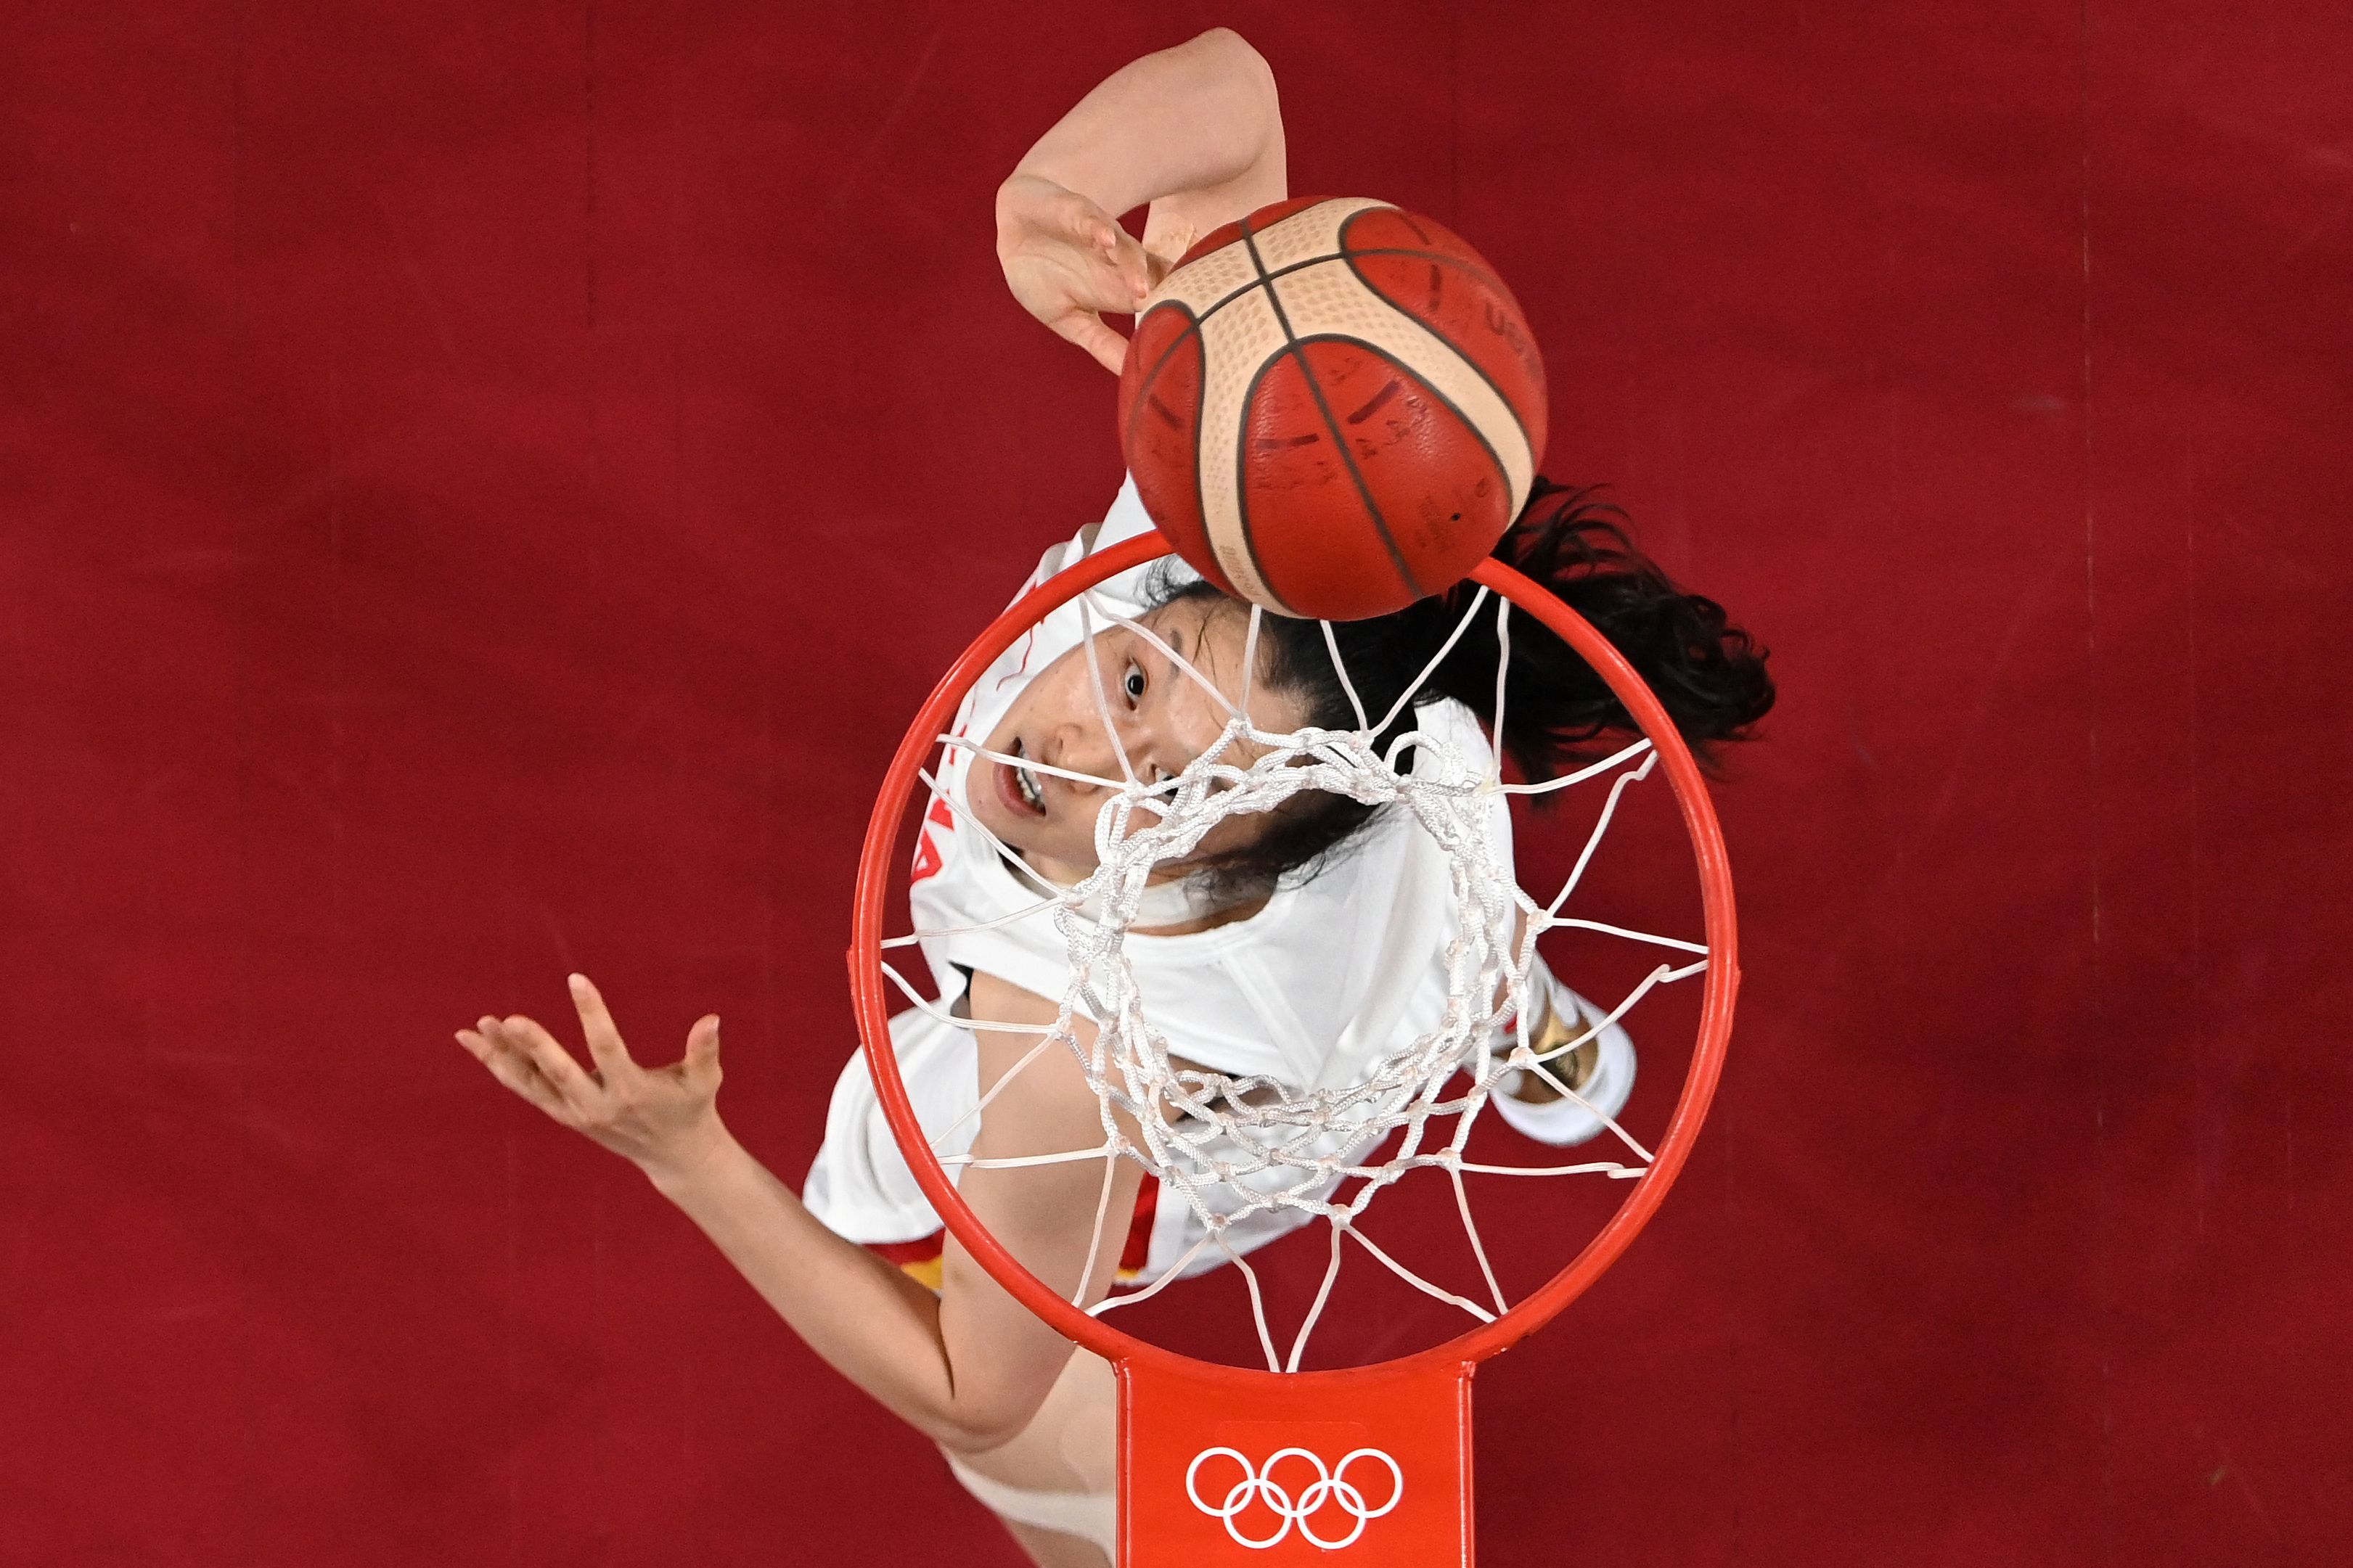 China's Shao Ting goes to the basket in the women's quarter-final basketball match between China and Serbia during the Tokyo 2020 Olympic Games at the Saitama Super Arena in Saitama on August 4